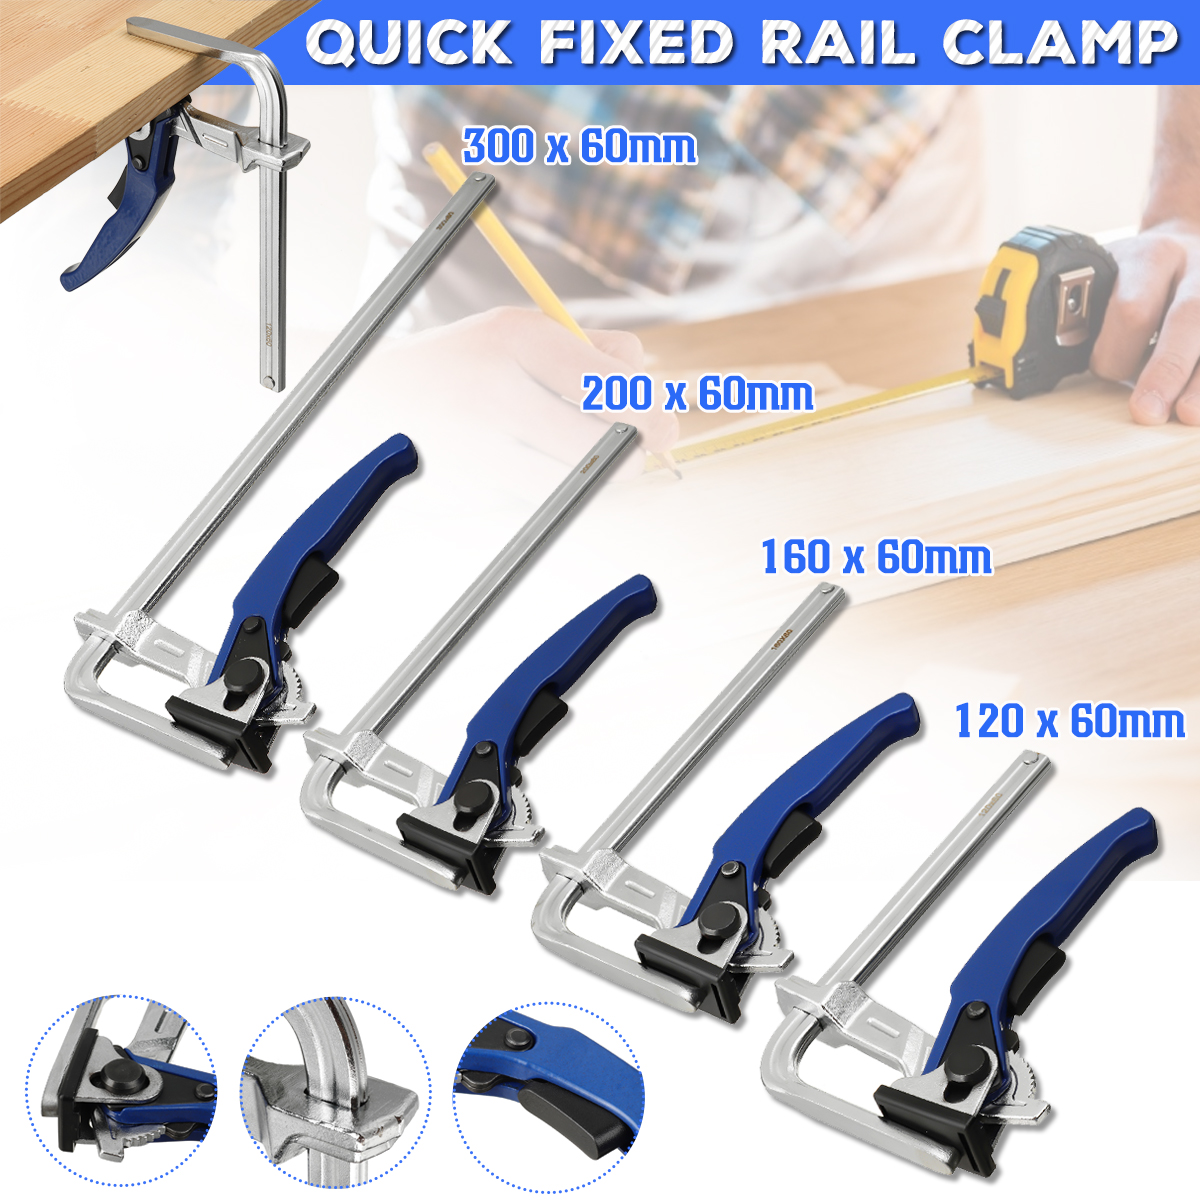 Quick-Guide-Rail-Clamp-Carpenter-F-Clamp-Quick-Clamping-for-MFT-and-Guide-Rail-System-Woodworking-To-1937747-5